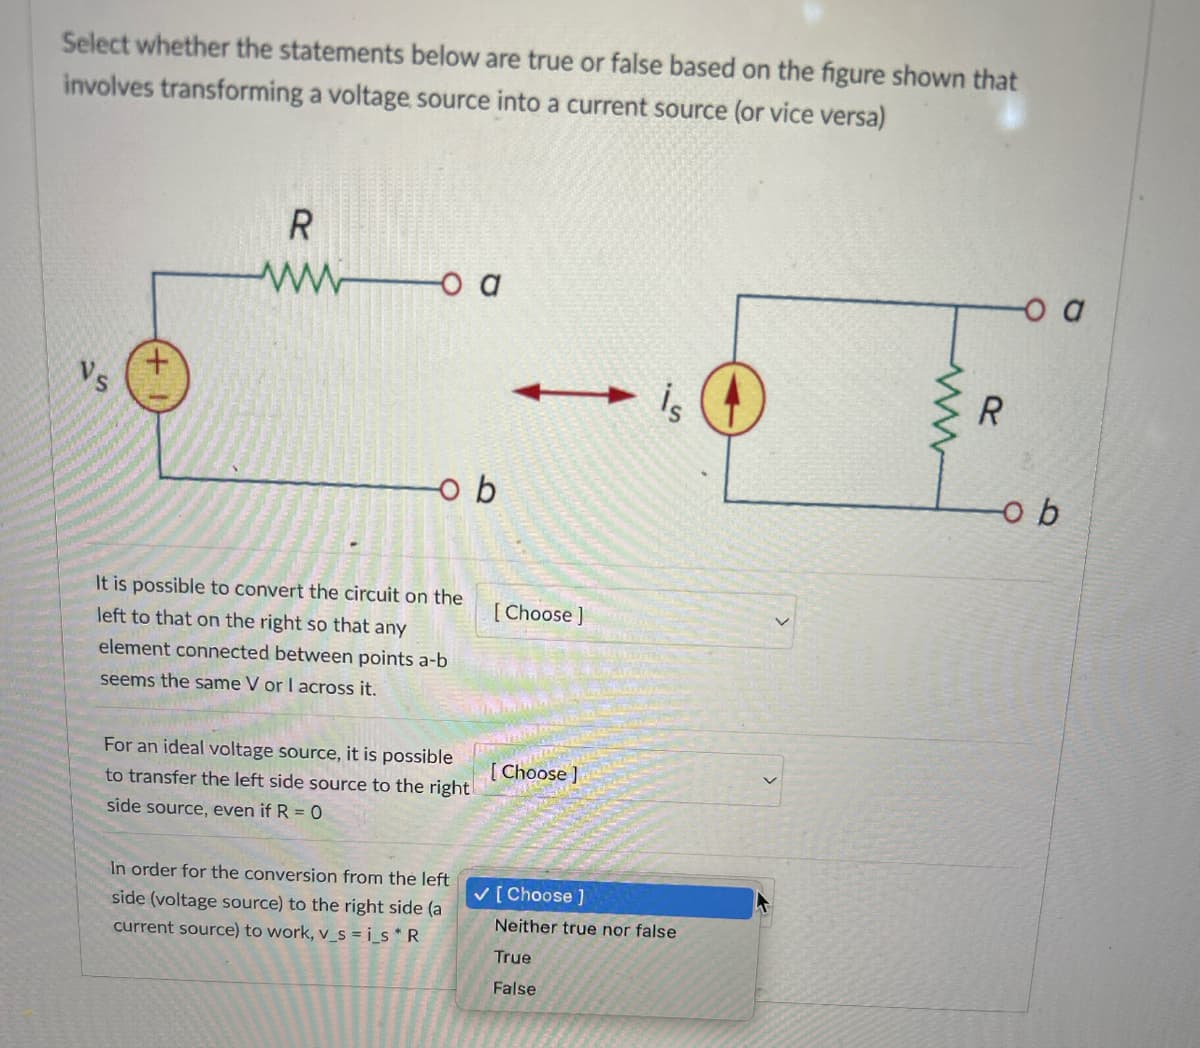 Select whether the statements below are true or false based on the figure shown that
involves transforming a voltage source into a current source (or vice versa)
Vs
R
wwo a
o b
It is possible to convert the circuit on the
left to that on the right so that any
element connected between points a-b
seems the same V or I across it.
[Choose ]
For an ideal voltage source, it is possible
to transfer the left side source to the right
side source, even if R = 0
[Choose ]
In order for the conversion from the left
side (voltage source) to the right side (a
current source) to work, v_si_s* R
✓ [Choose]
Neither true nor false
True
False
www
R
-o b